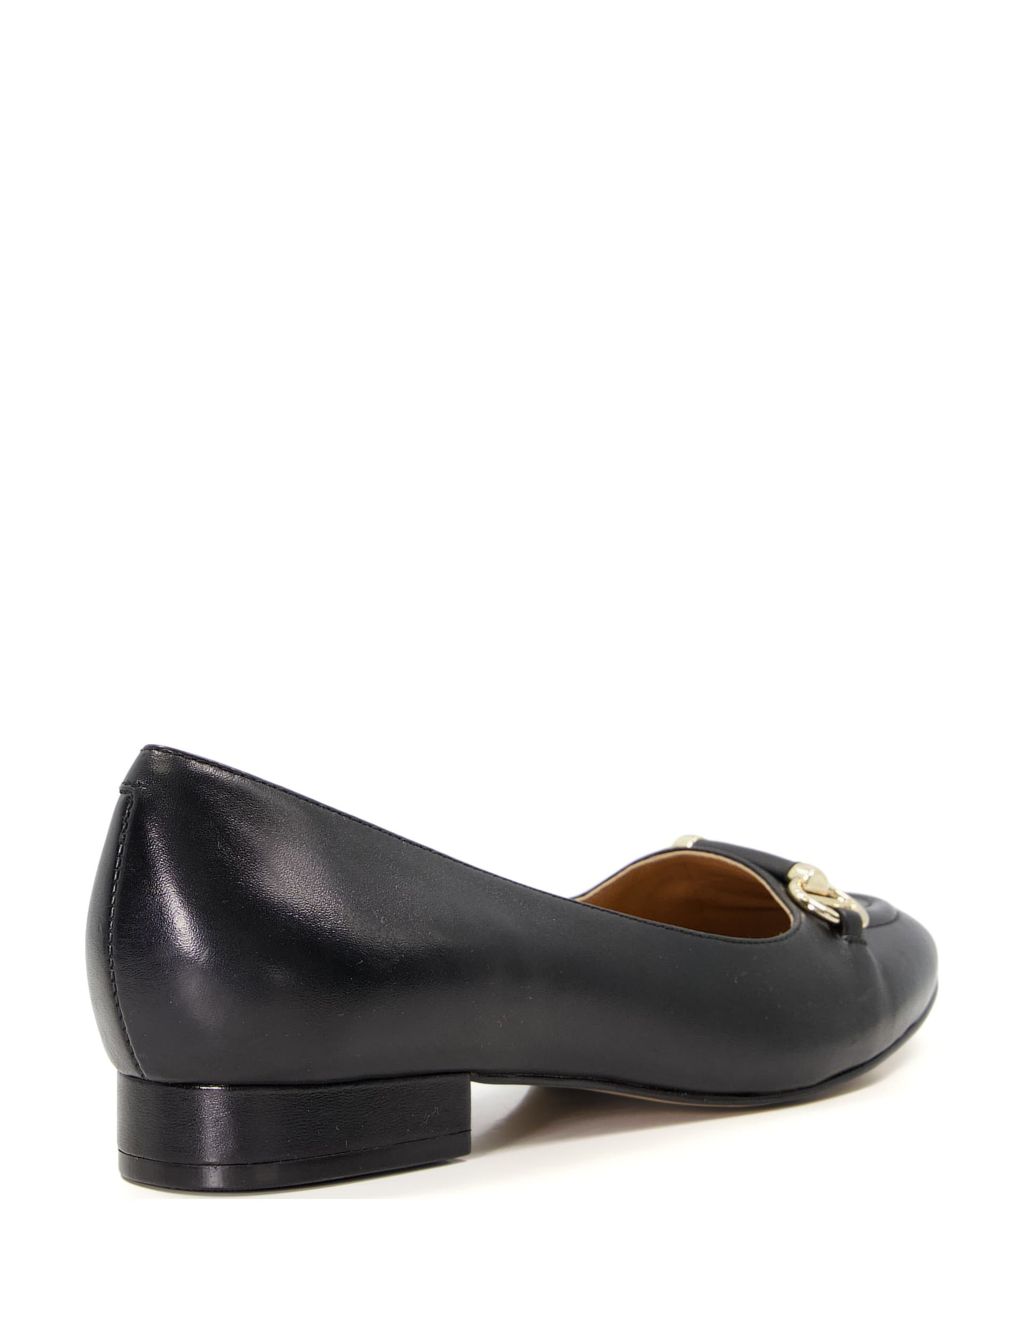 Leather Buckle Flat Pumps image 2